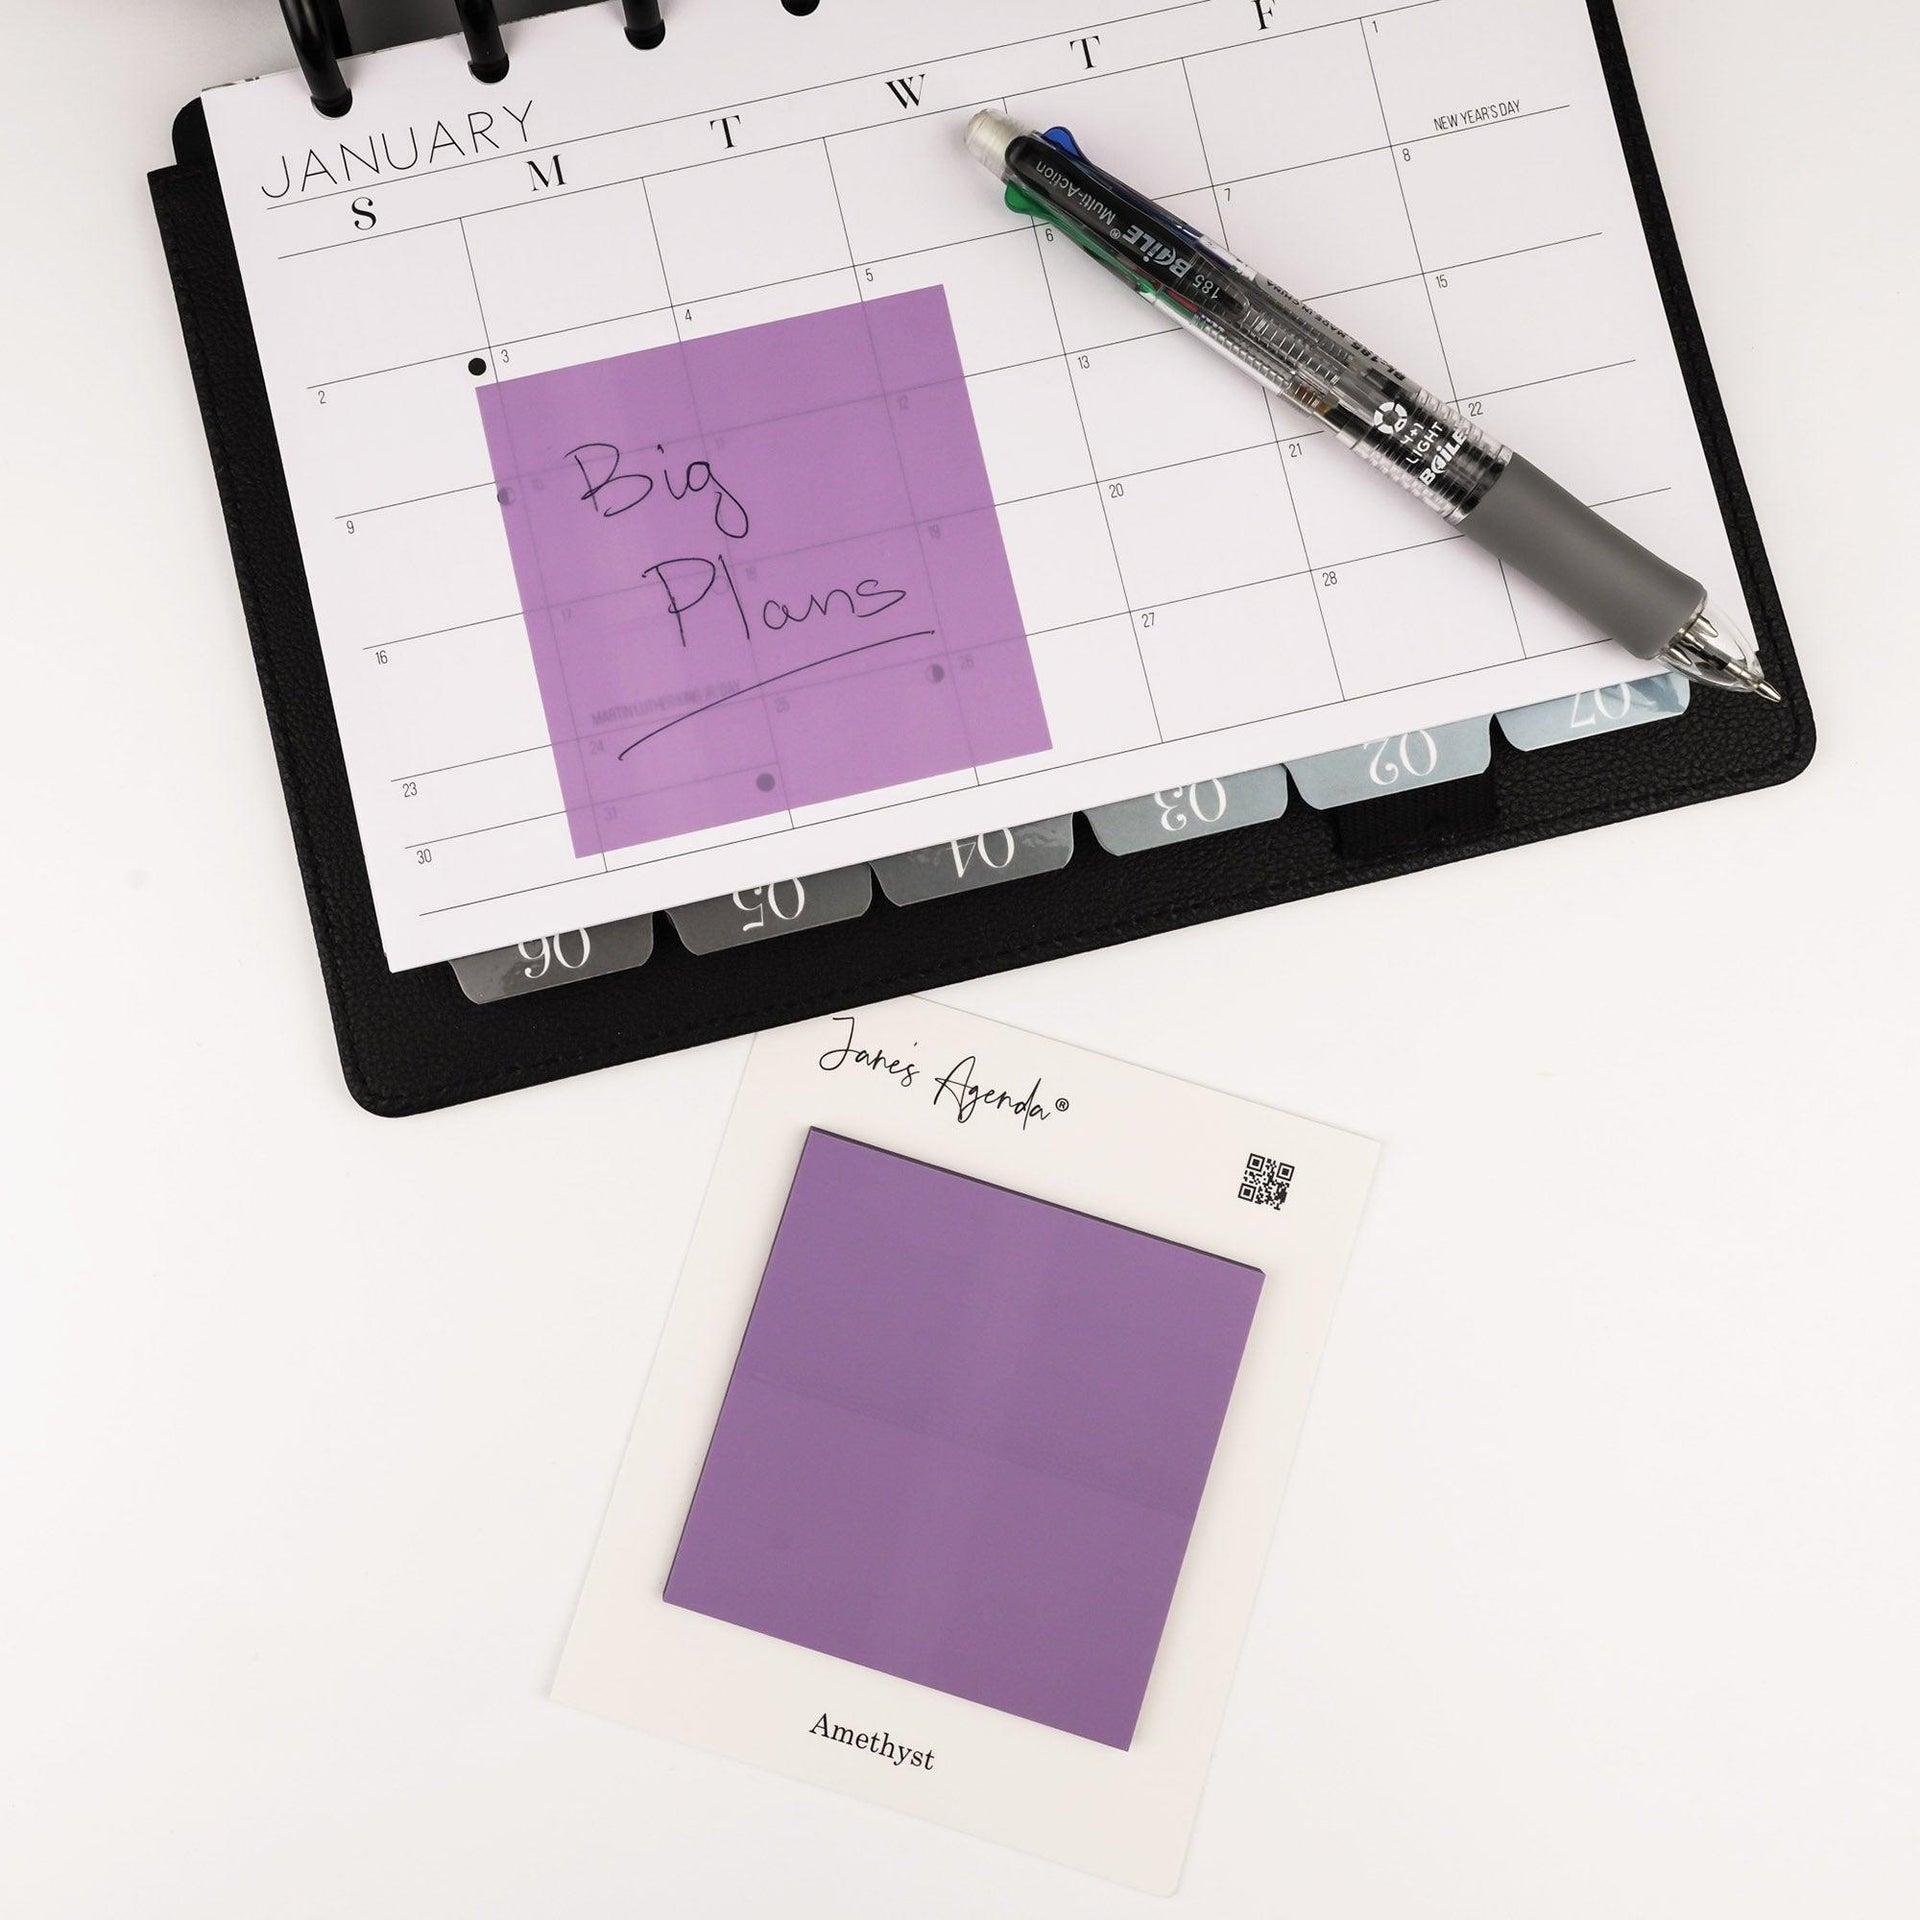 These beautiful purple sticky notes are translucent and are perfect for quick note taking. These sticky notes are available in the Jane's Agenda® shop to  go with all of your planner needs. Jane's Agenda® is a planner lifestyle brand dedicated to creating functional planning tools for organization and productivity.